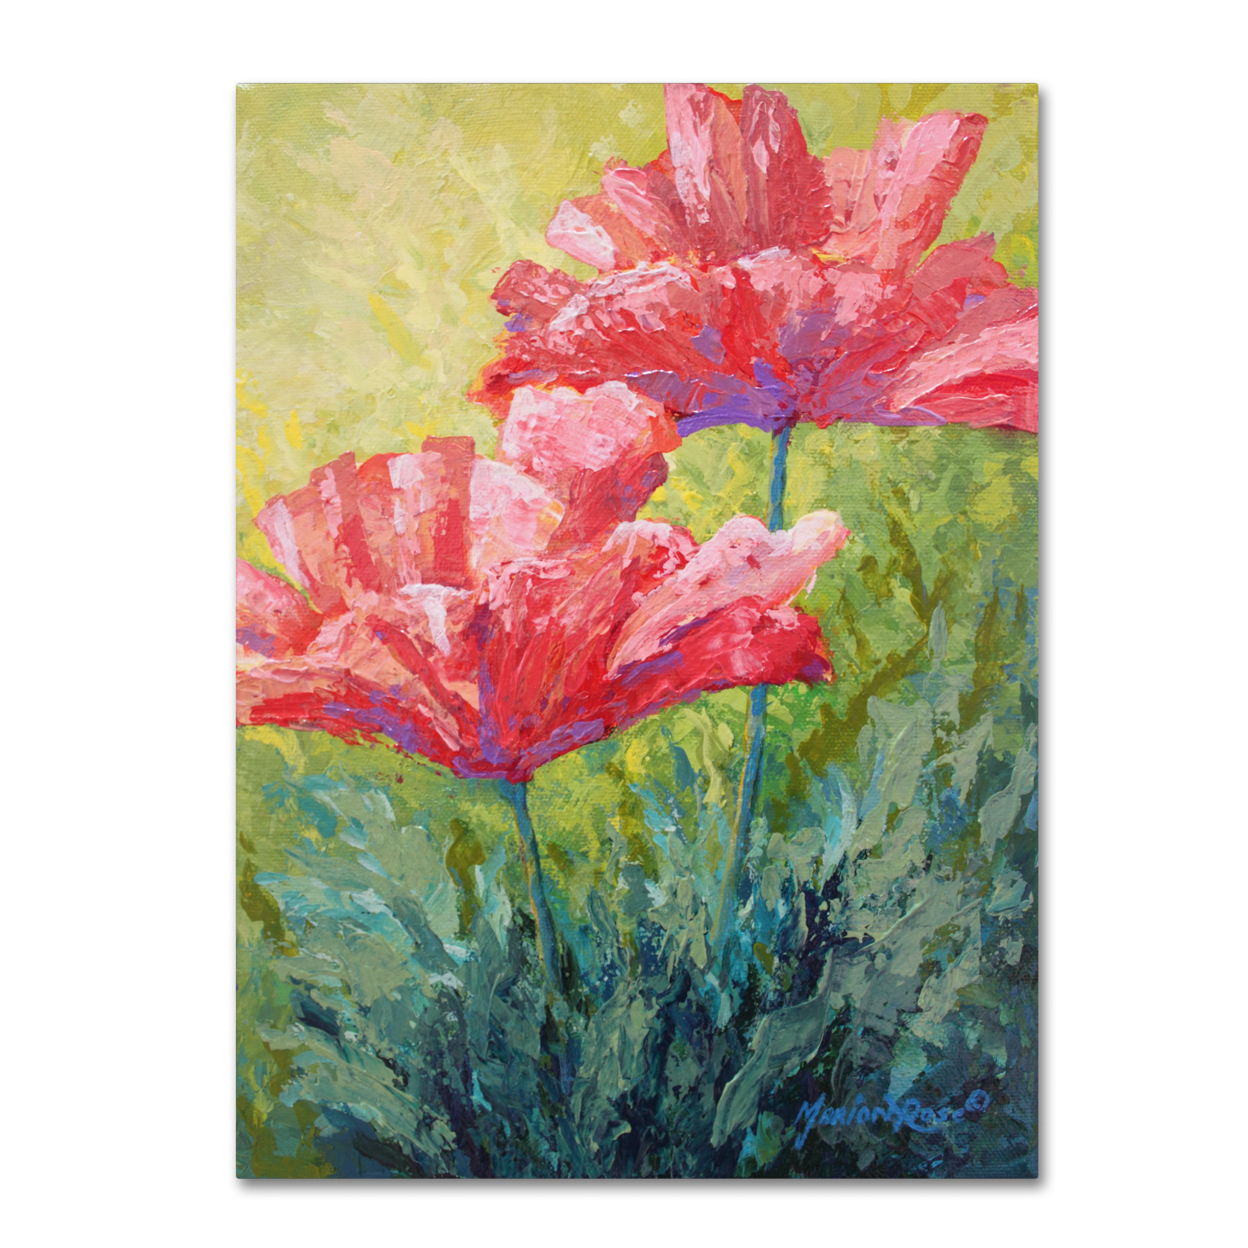 Marion Rose 'Two Red Poppies ' Ready To Hang Canvas Art 35 X 47 Inches Made In USA